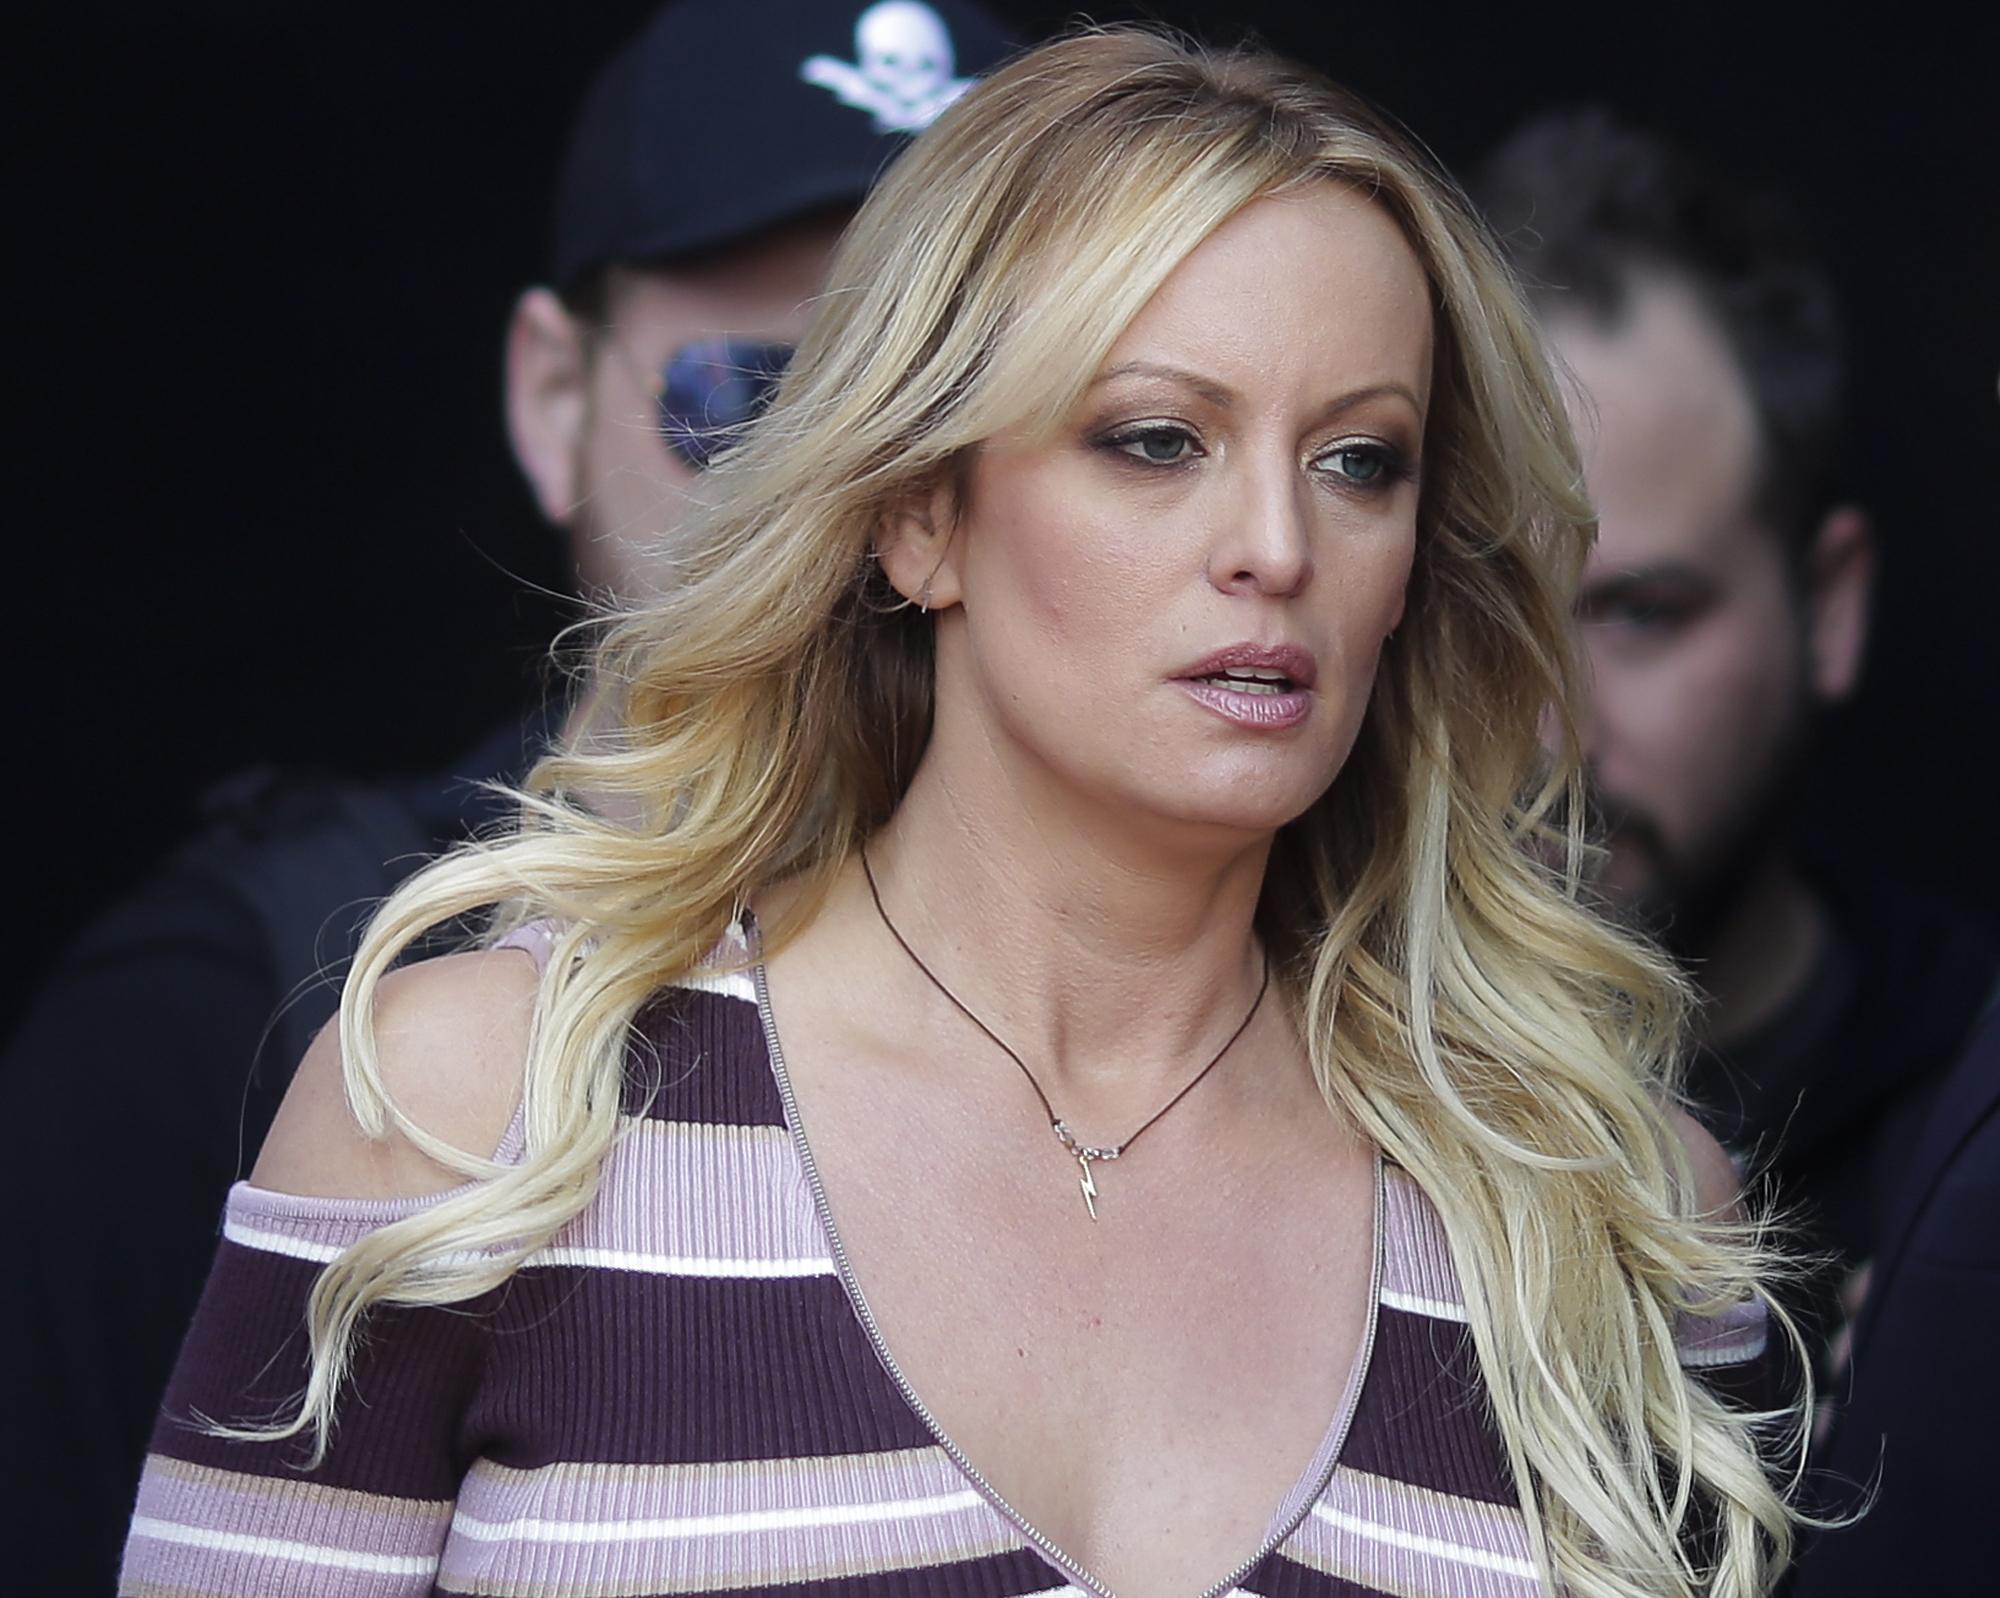 California Judge Orders Porn Star To Pay Trump Legal Fees The